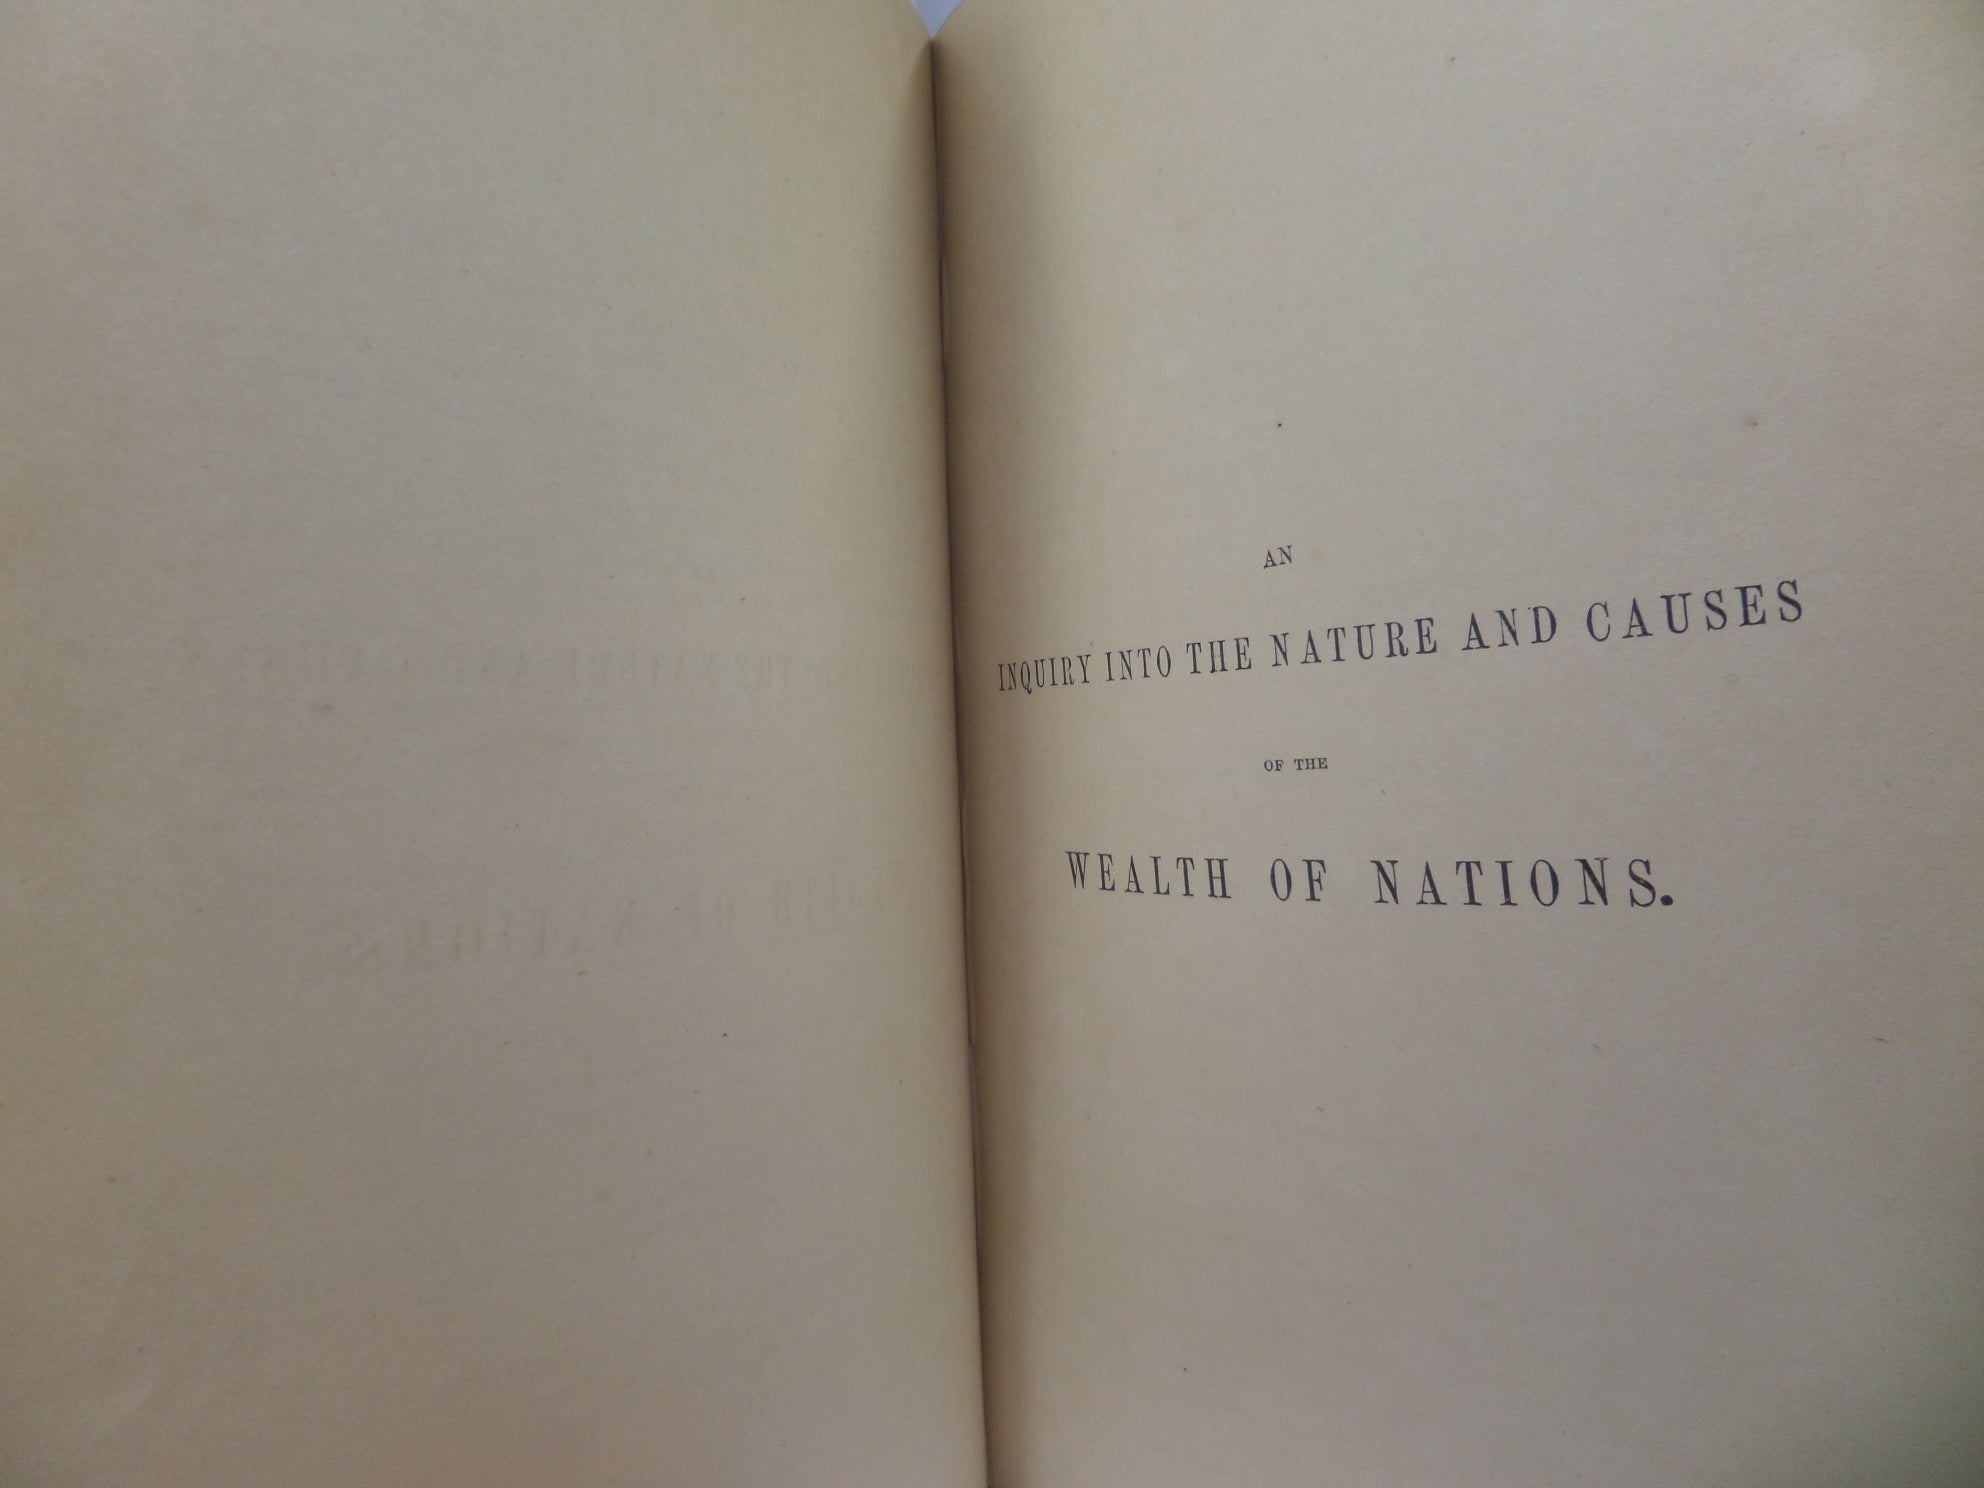 THE WEALTH OF NATIONS BY ADAM SMITH 1850 FOURTH EDITION, FINE LEATHER BINDING